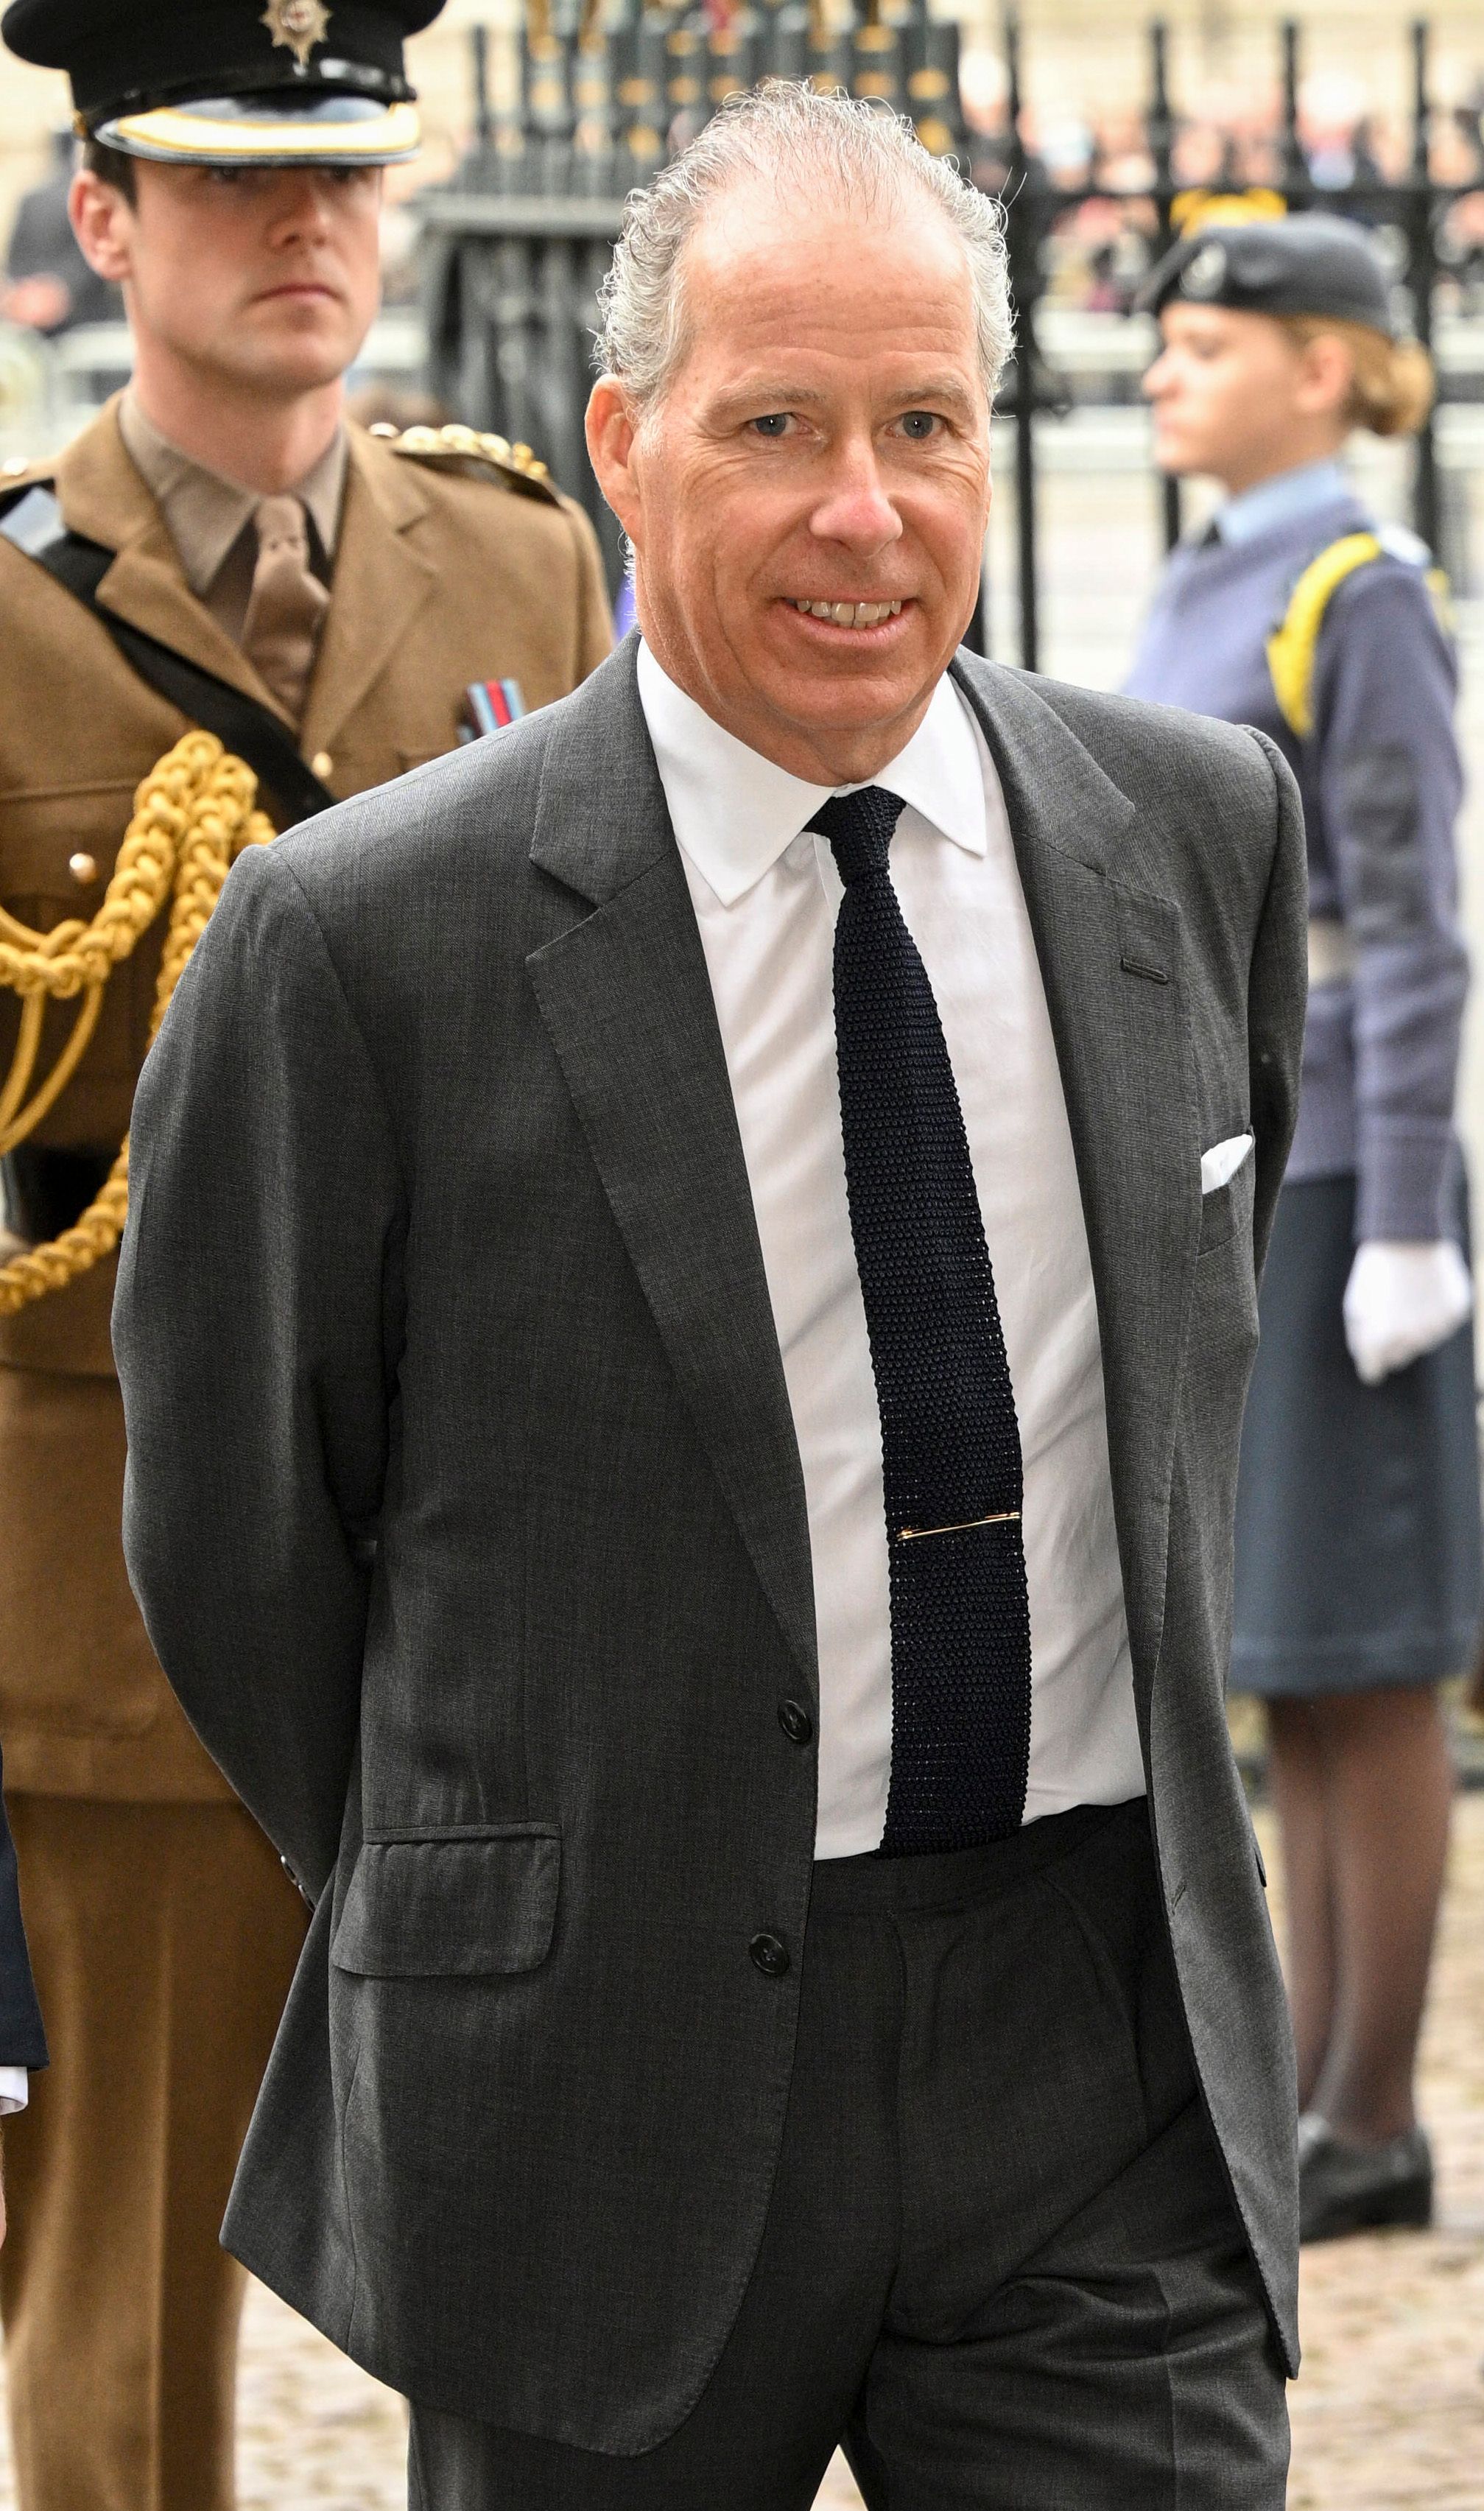 <p>David Armstrong-Jones, Earl of Snowdon (previously known as David Linley), is now 25th in line to the British throne. He is the nephew of Queen Elizabeth II and the son of Elizabeth's sister, Princess Margaret, who passed away in 2002. While he grew up alongside Prince Charles, the heir to the throne, David followed a different path in his adult life. He became a renowned furniture maker and once served as the chairman of Christie's, the elite auction house.</p>